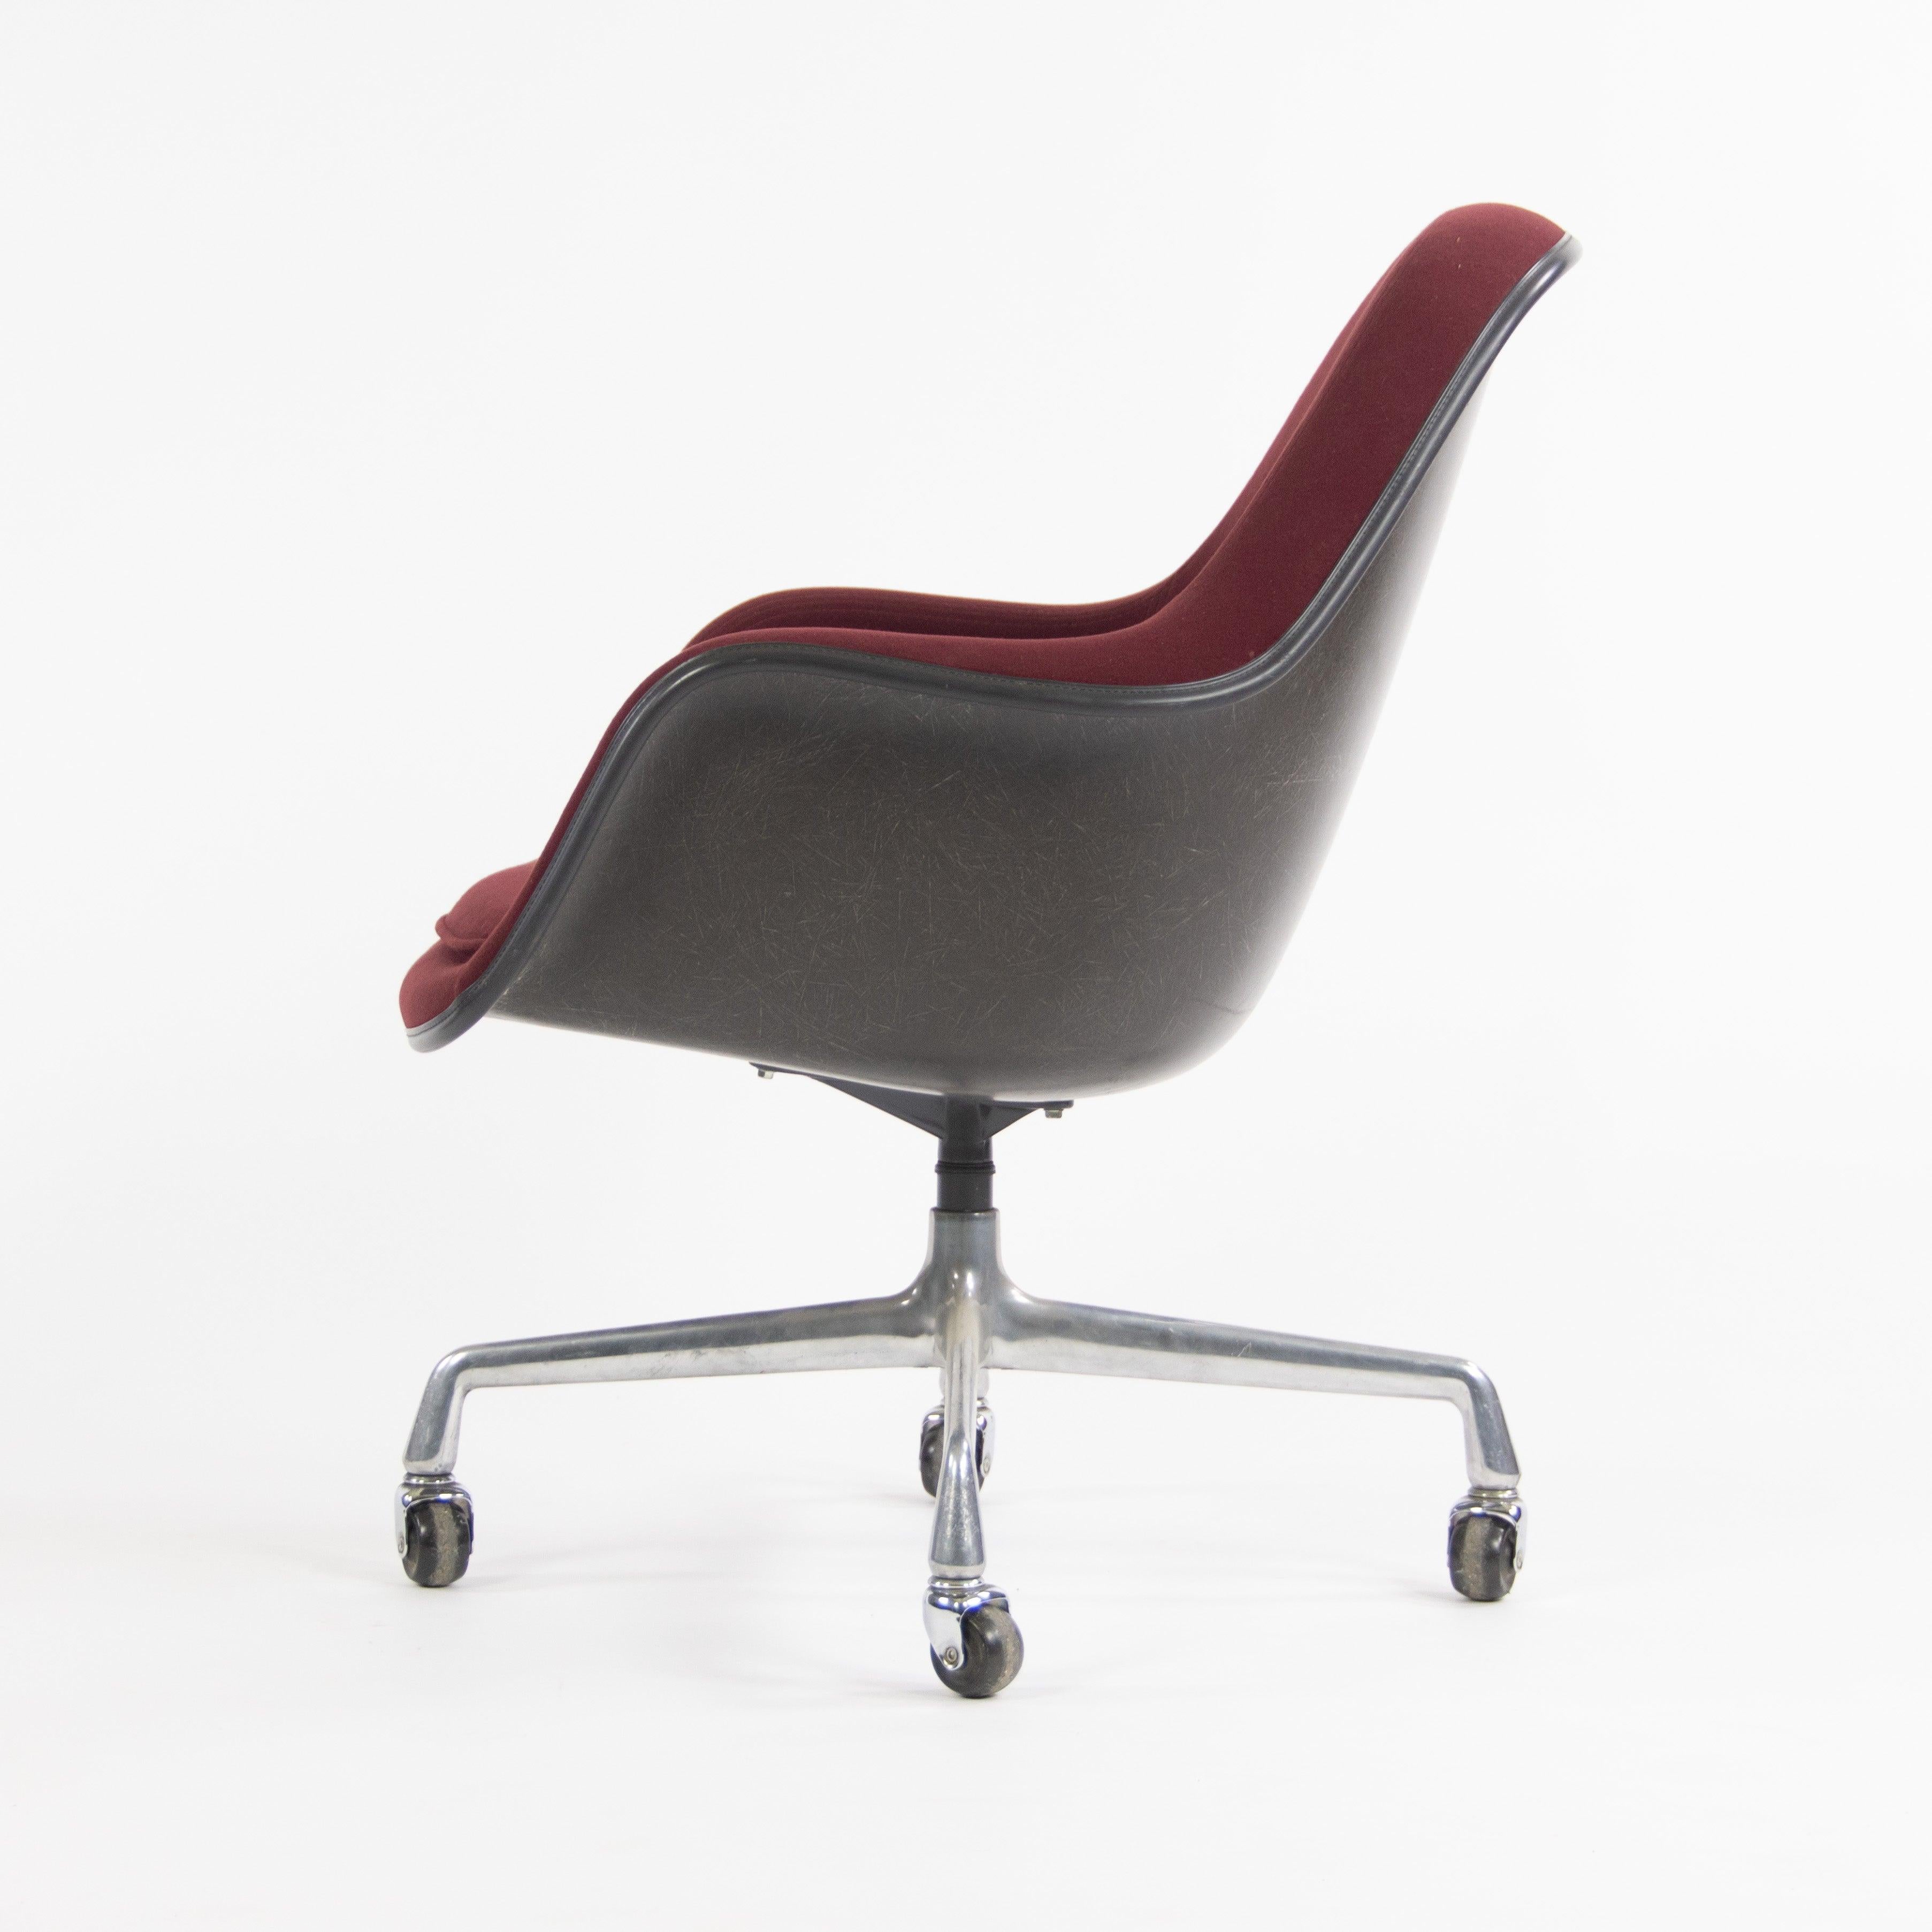 Listed for sale is a very rare and marvelous EC175-8 chair, designed by Charles and Ray Eames, produced by Herman Miller. This is one of the more unique and later Eames designs, building upon the 1950's fiberglass innovations, though suiting